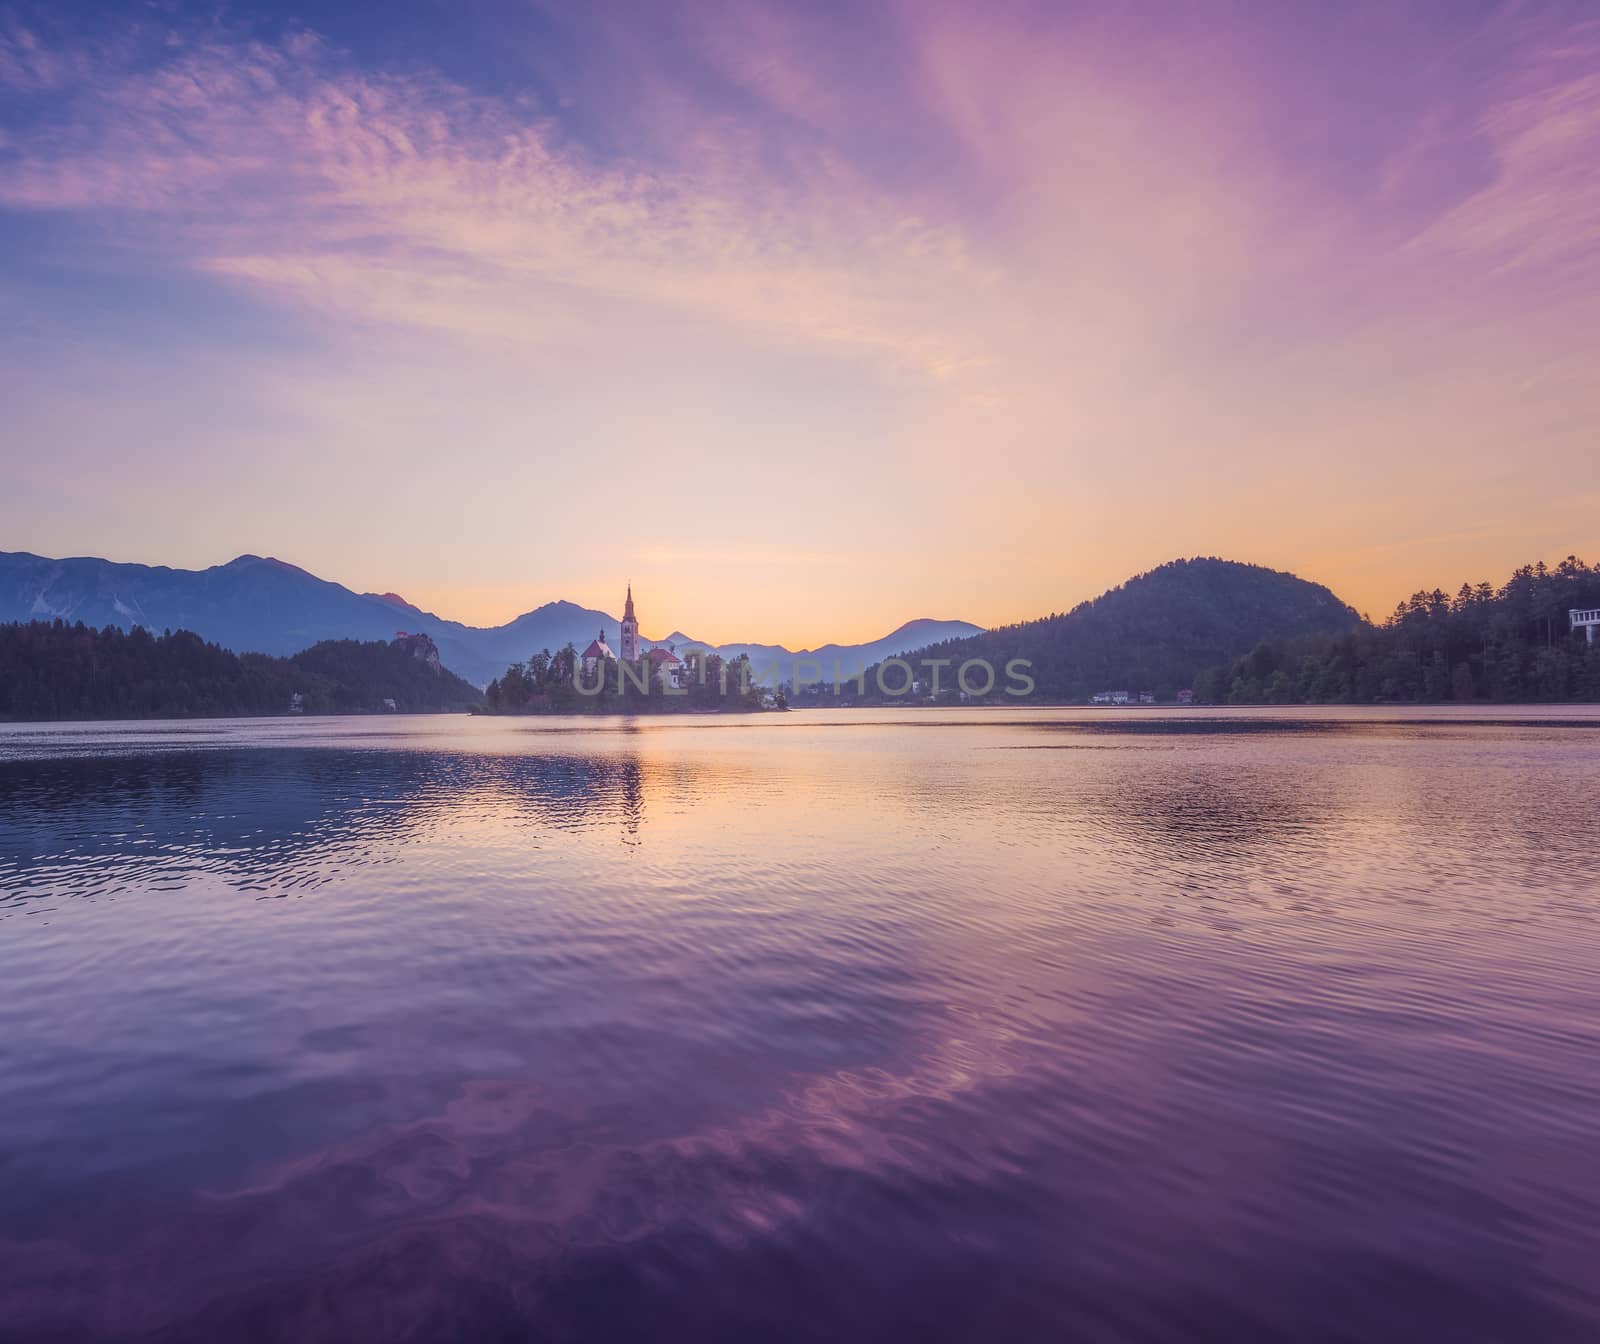 Little Island with Catholic Church in Bled Lake, Slovenia at Sunrise with Castle and Mountains in Background